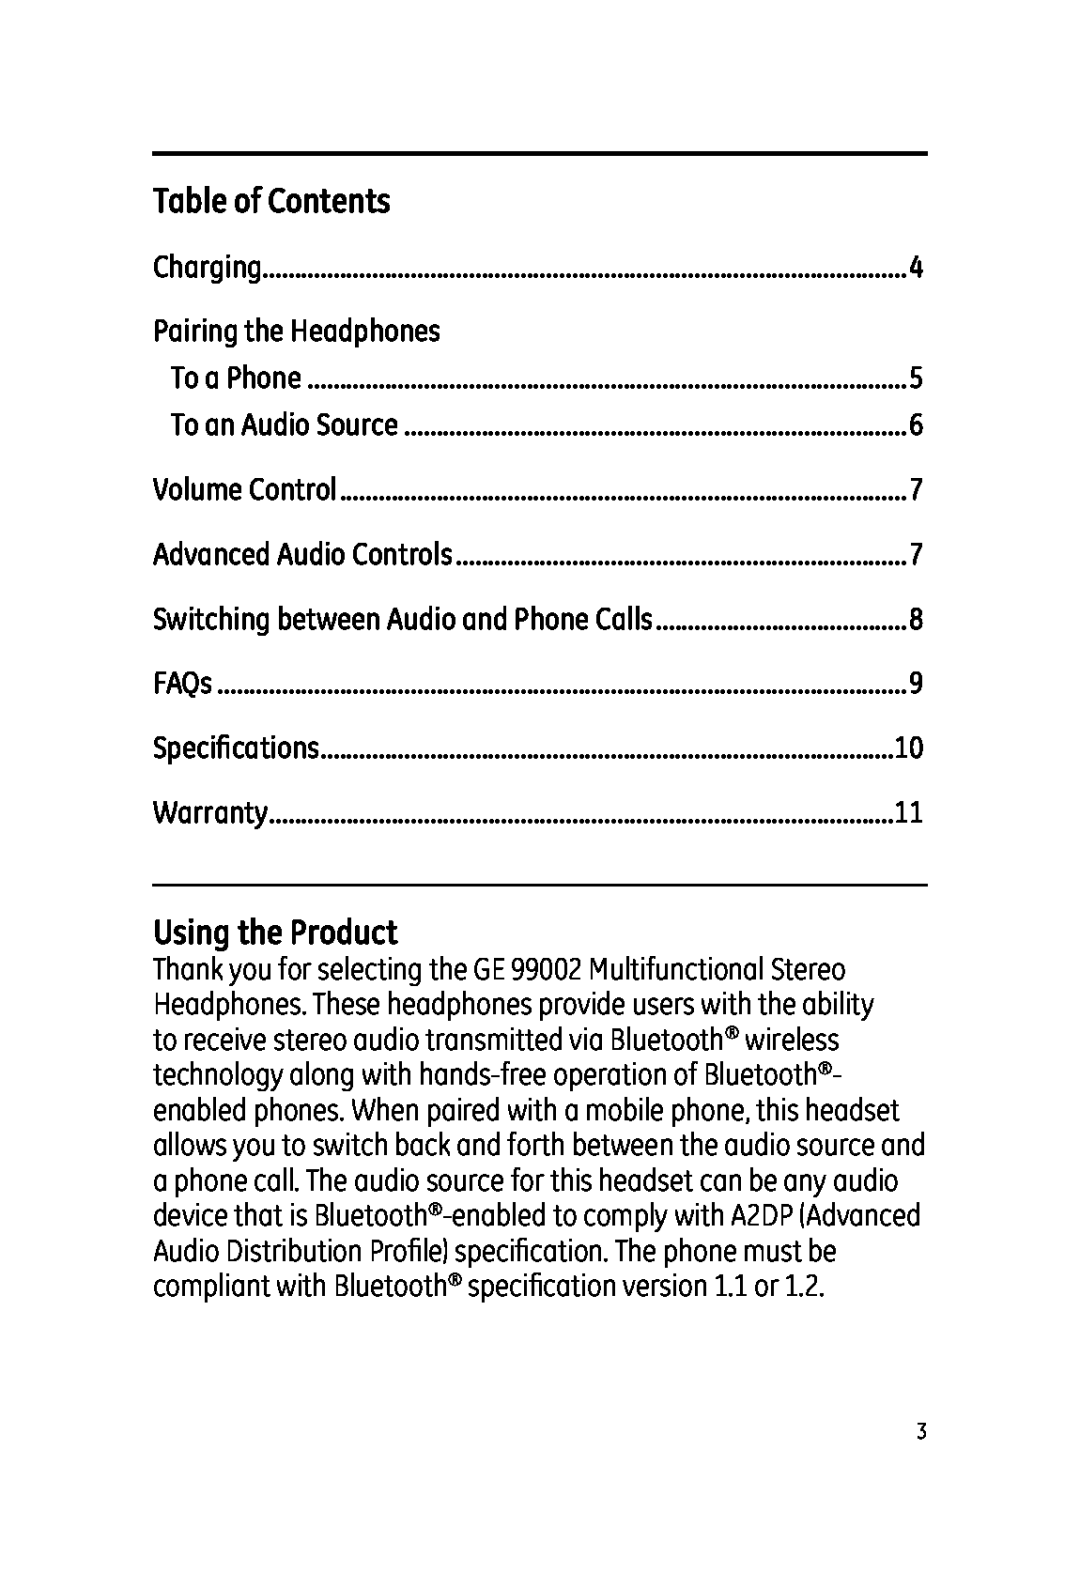 Jasco 99002 user manual Table of Contents, Using the Product, Pairing the Headphones 